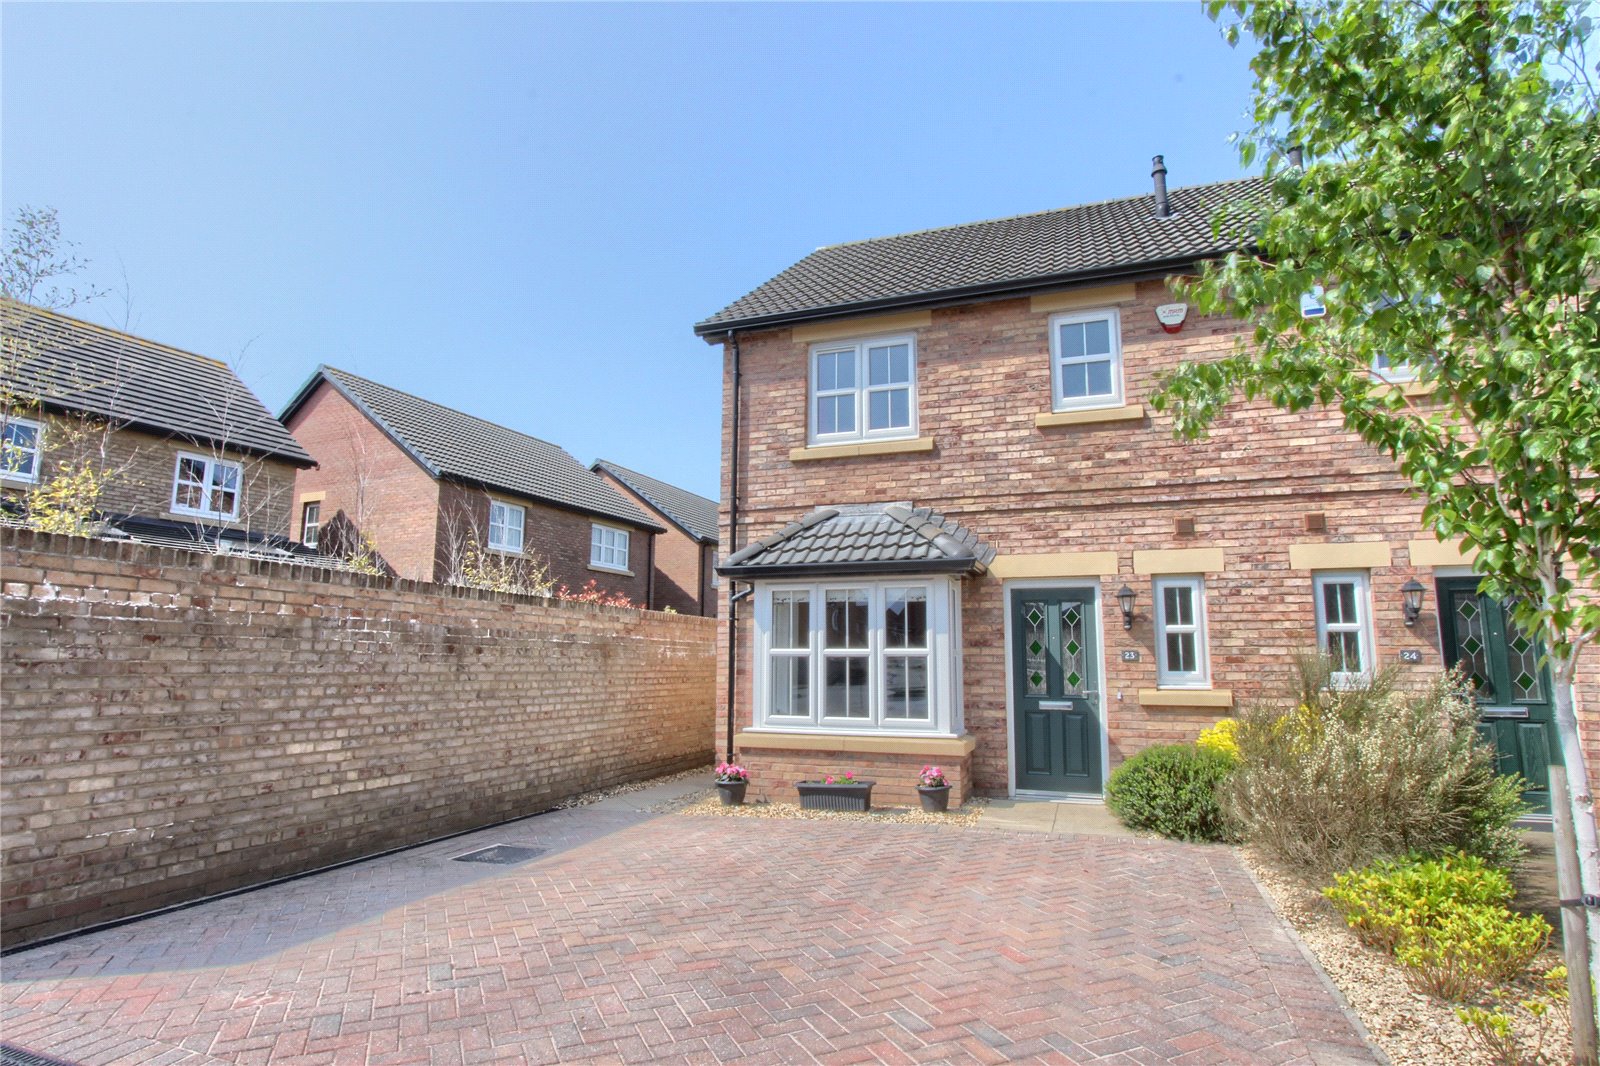 3 bed house for sale in Jocelyn Way, Stainsby Hall 1